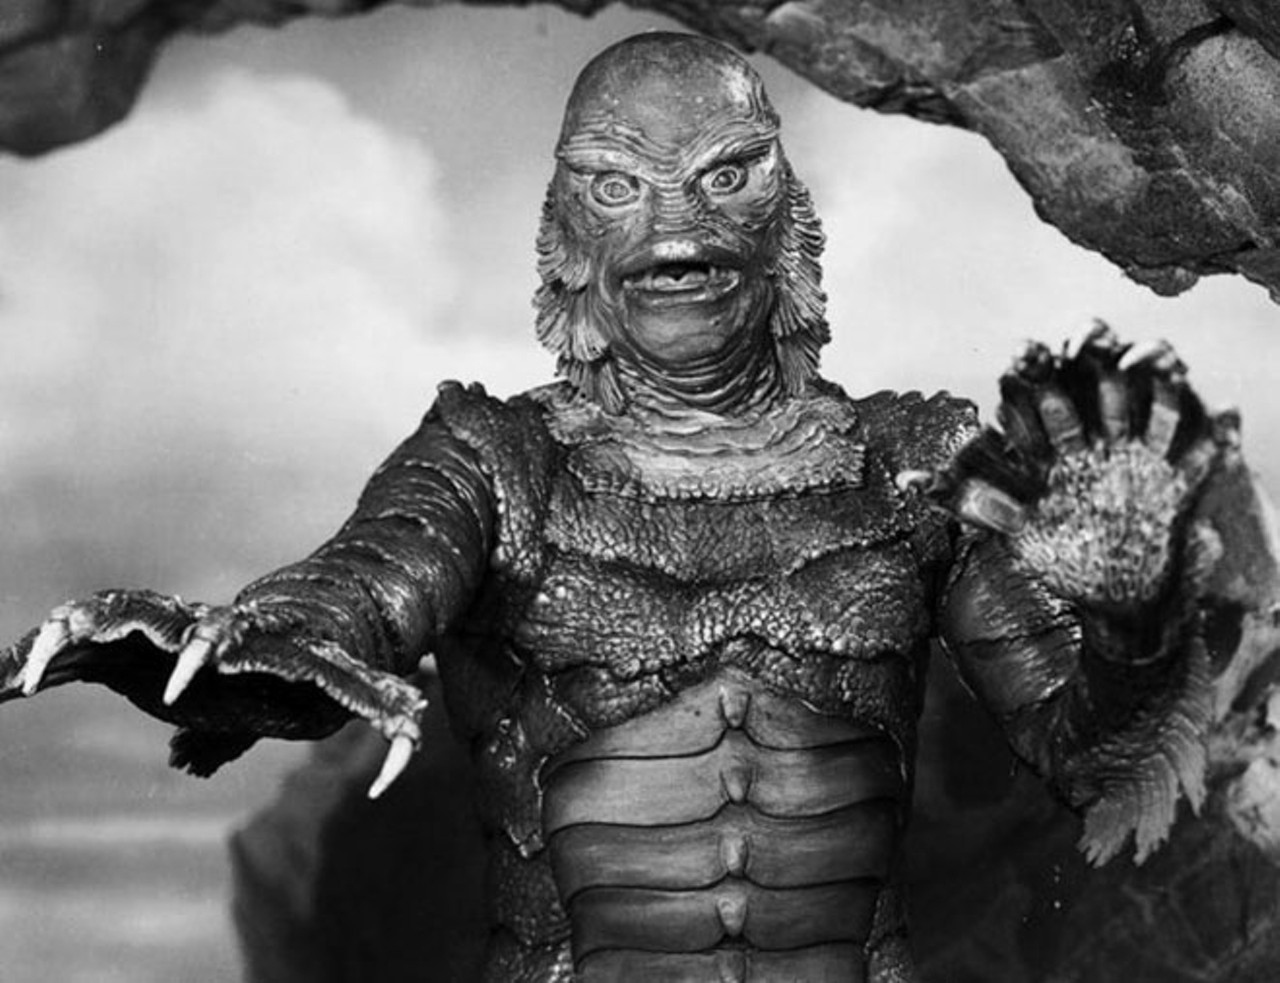 25. Creature from the Black Lagoon (1954)
Filmed in Silver Springs, Fla. and Jacksonville, Fla.
The Gill-man ain't going down without a fight. Scientists venture to the Amazon and attempt to capture an amphibious prehistoric lurking in the jungle and hellbent on killing.